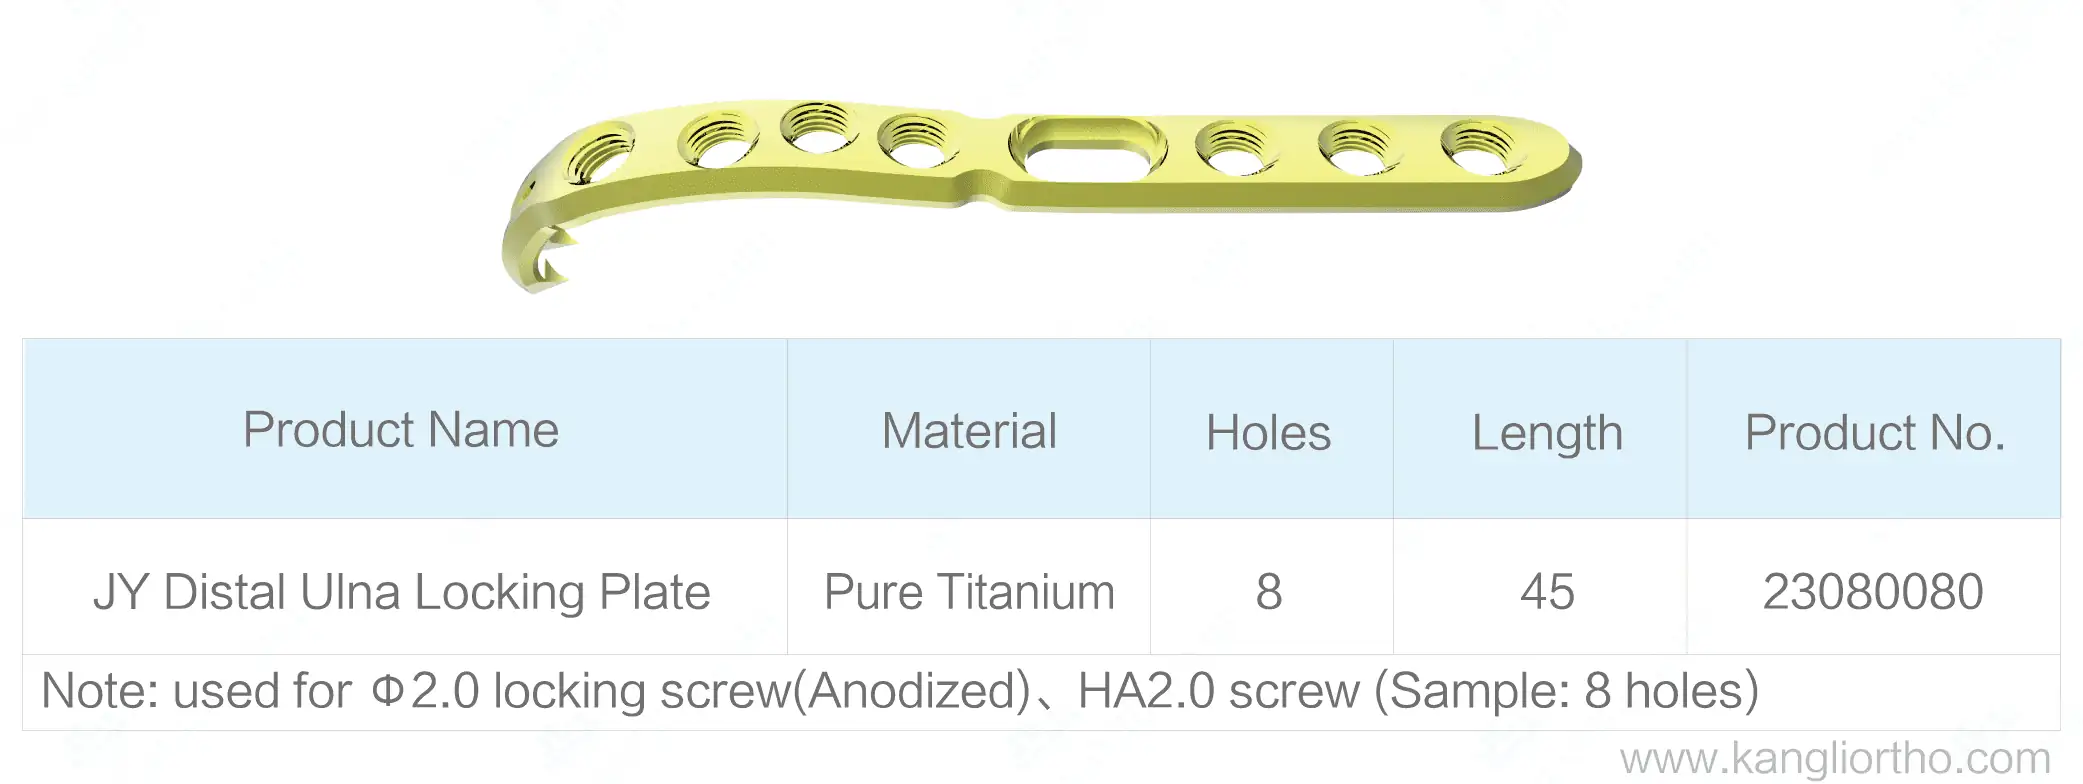 jy-distal-ulna-locking-plate-specifications